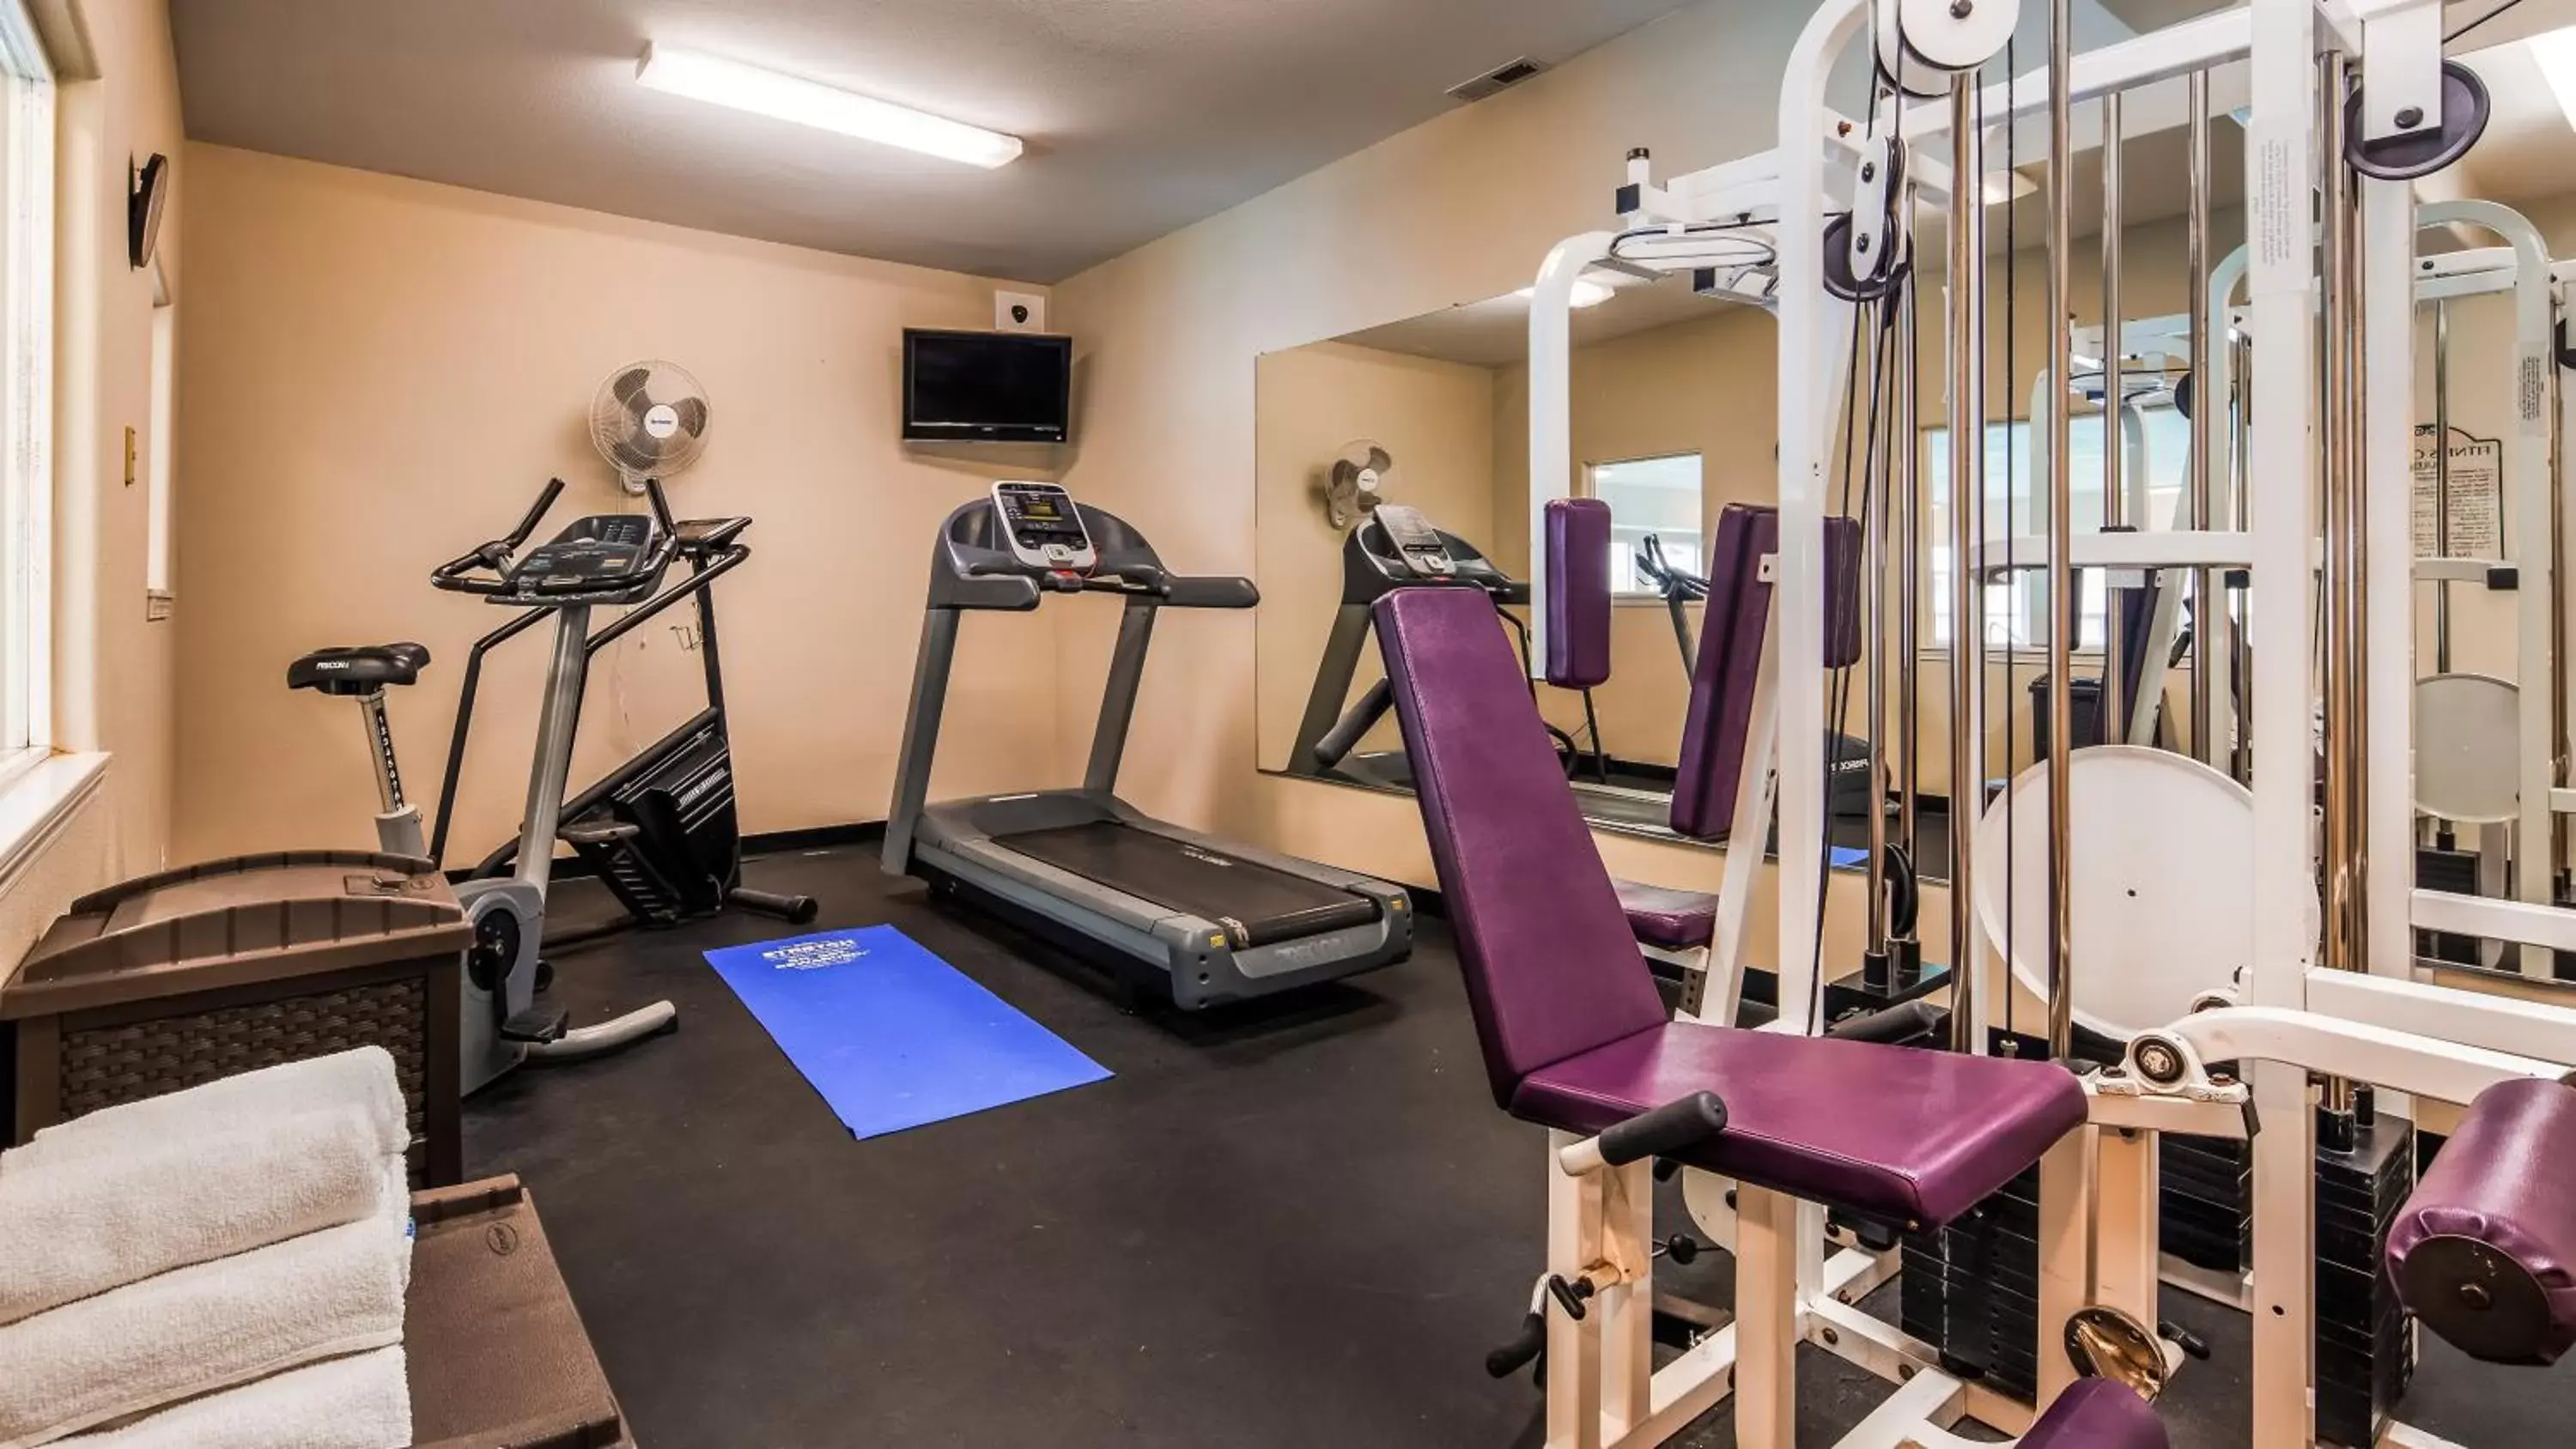 Fitness centre/facilities, Fitness Center/Facilities in Best Western Inn at Face Rock